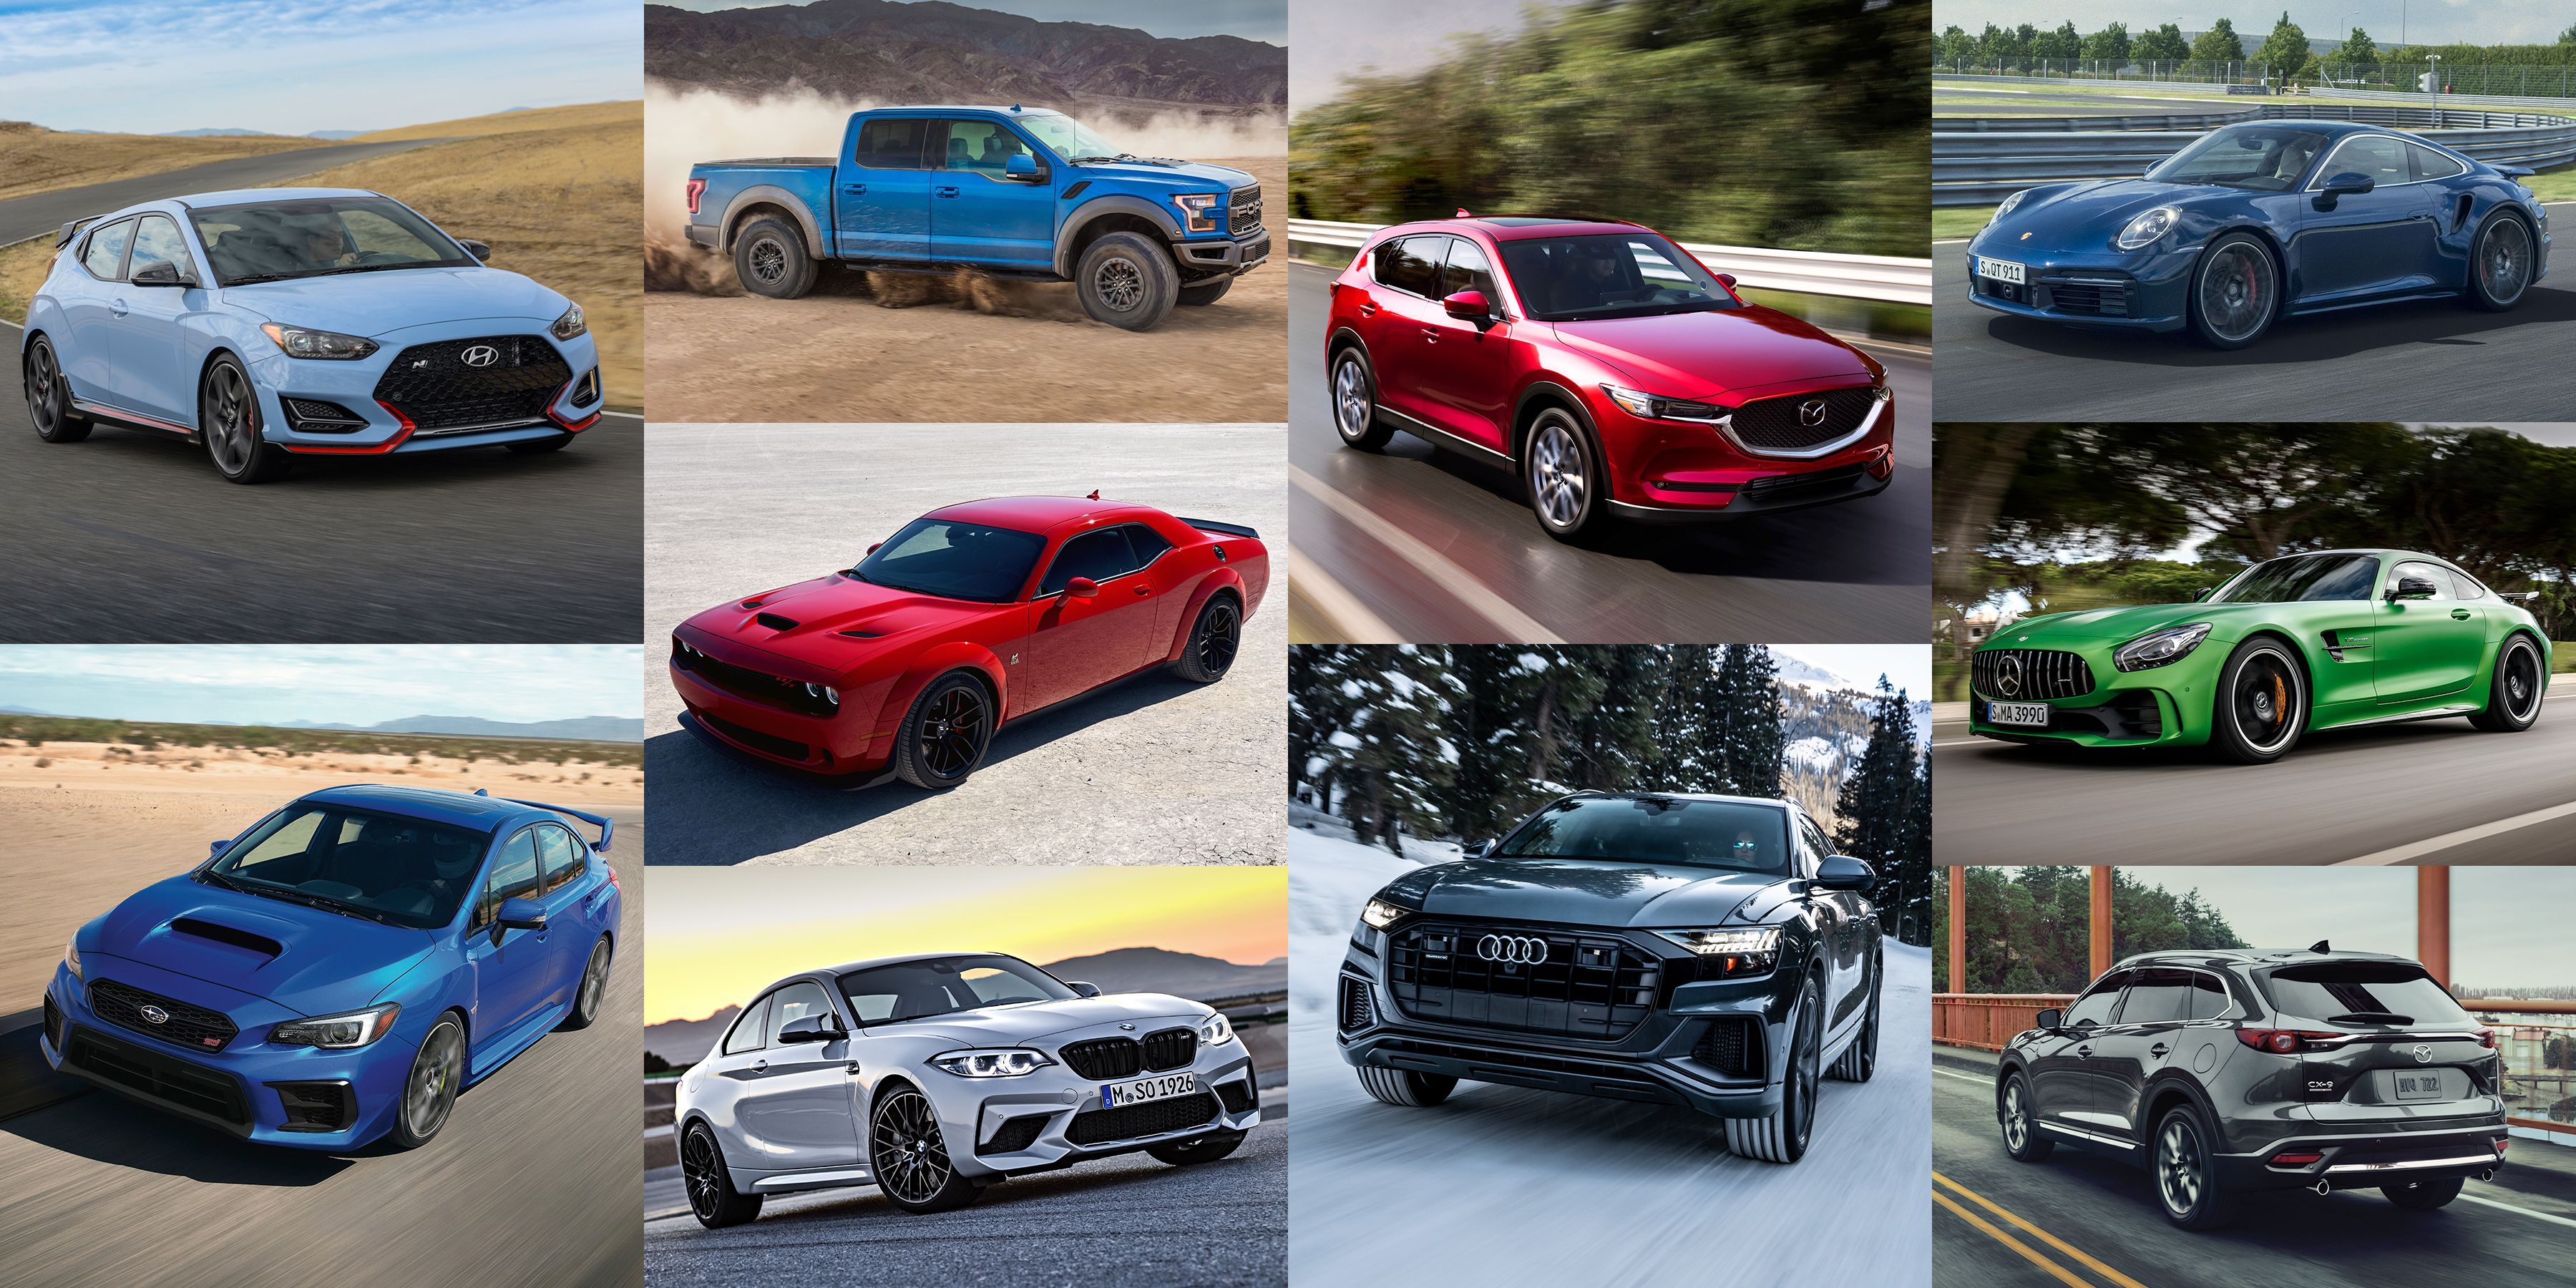 Car options: 5 over-the-top ones you should consider